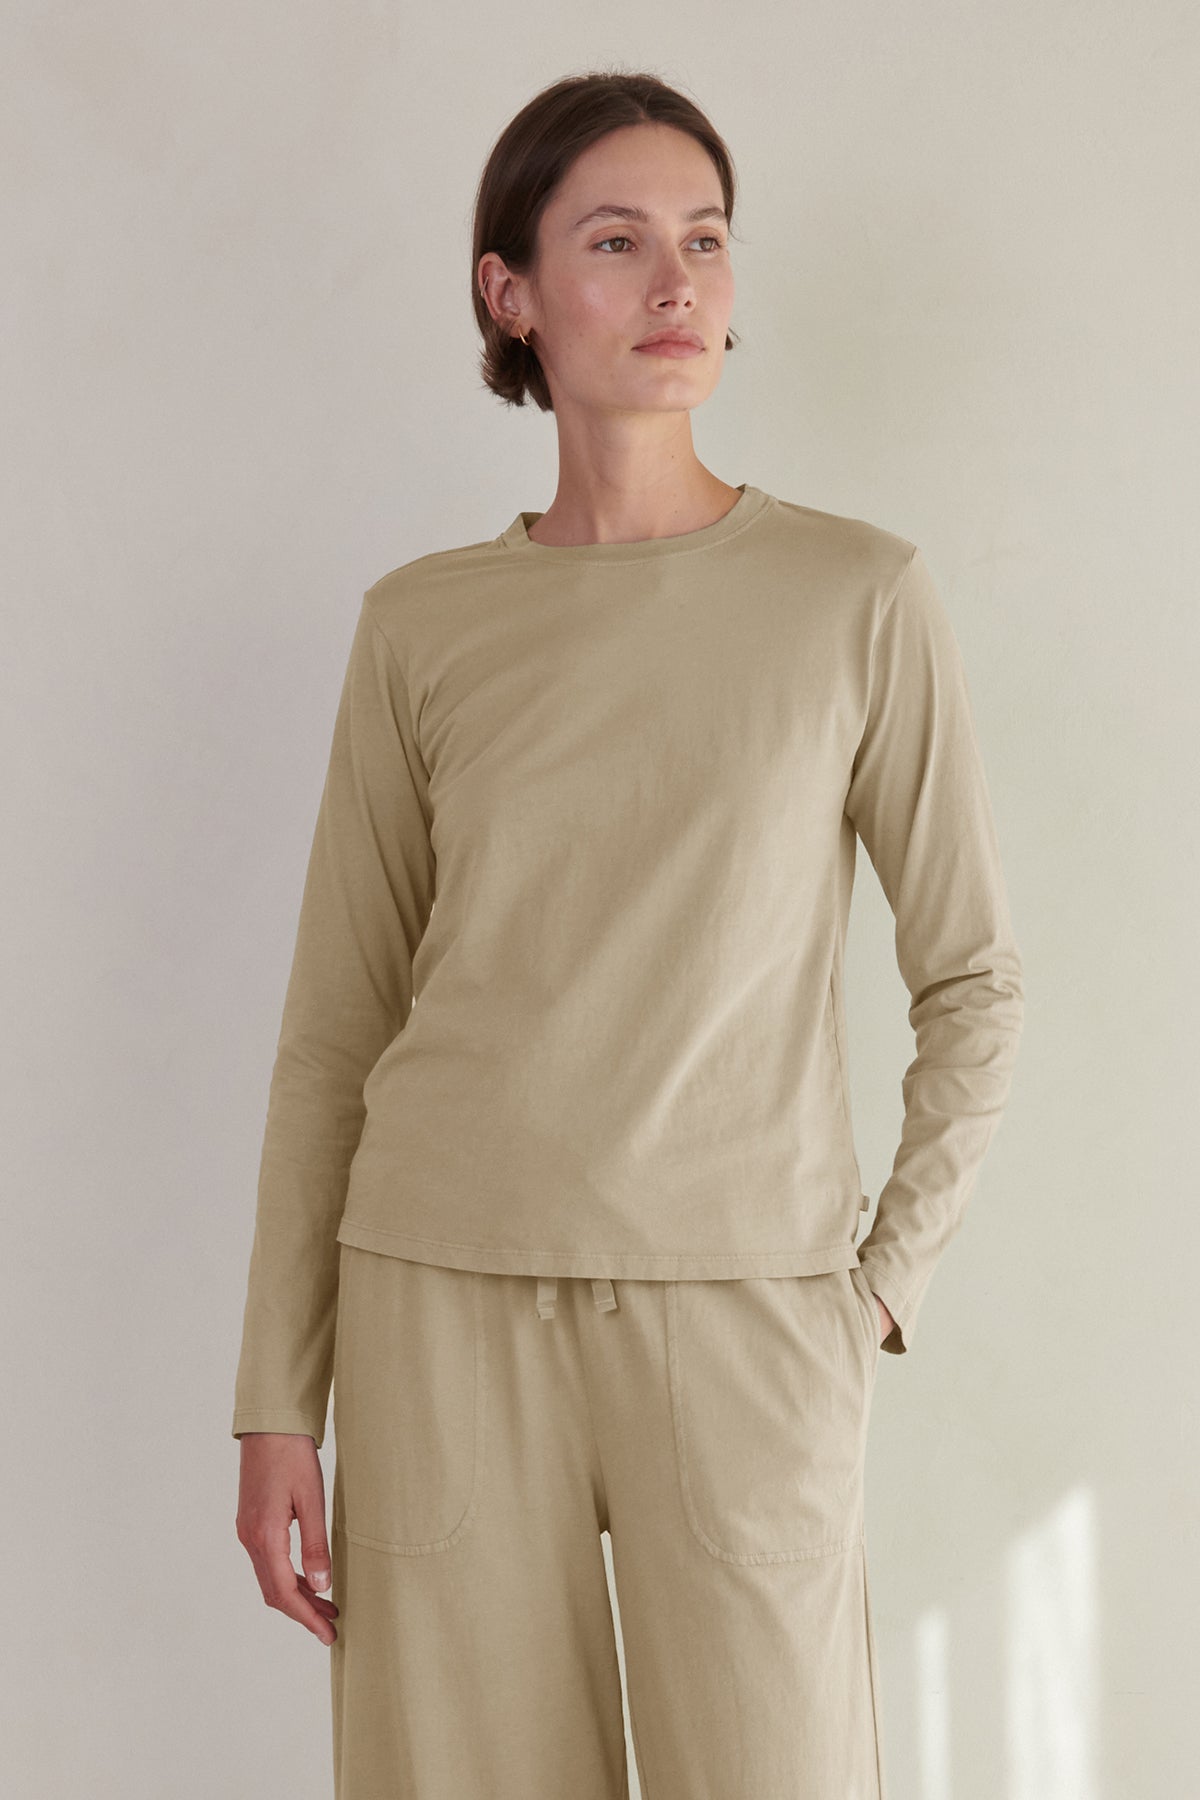 A woman wearing a beige long-sleeved VICENTE TEE and matching pants standing against a neutral background from Velvet by Jenny Graham.-36503755194561